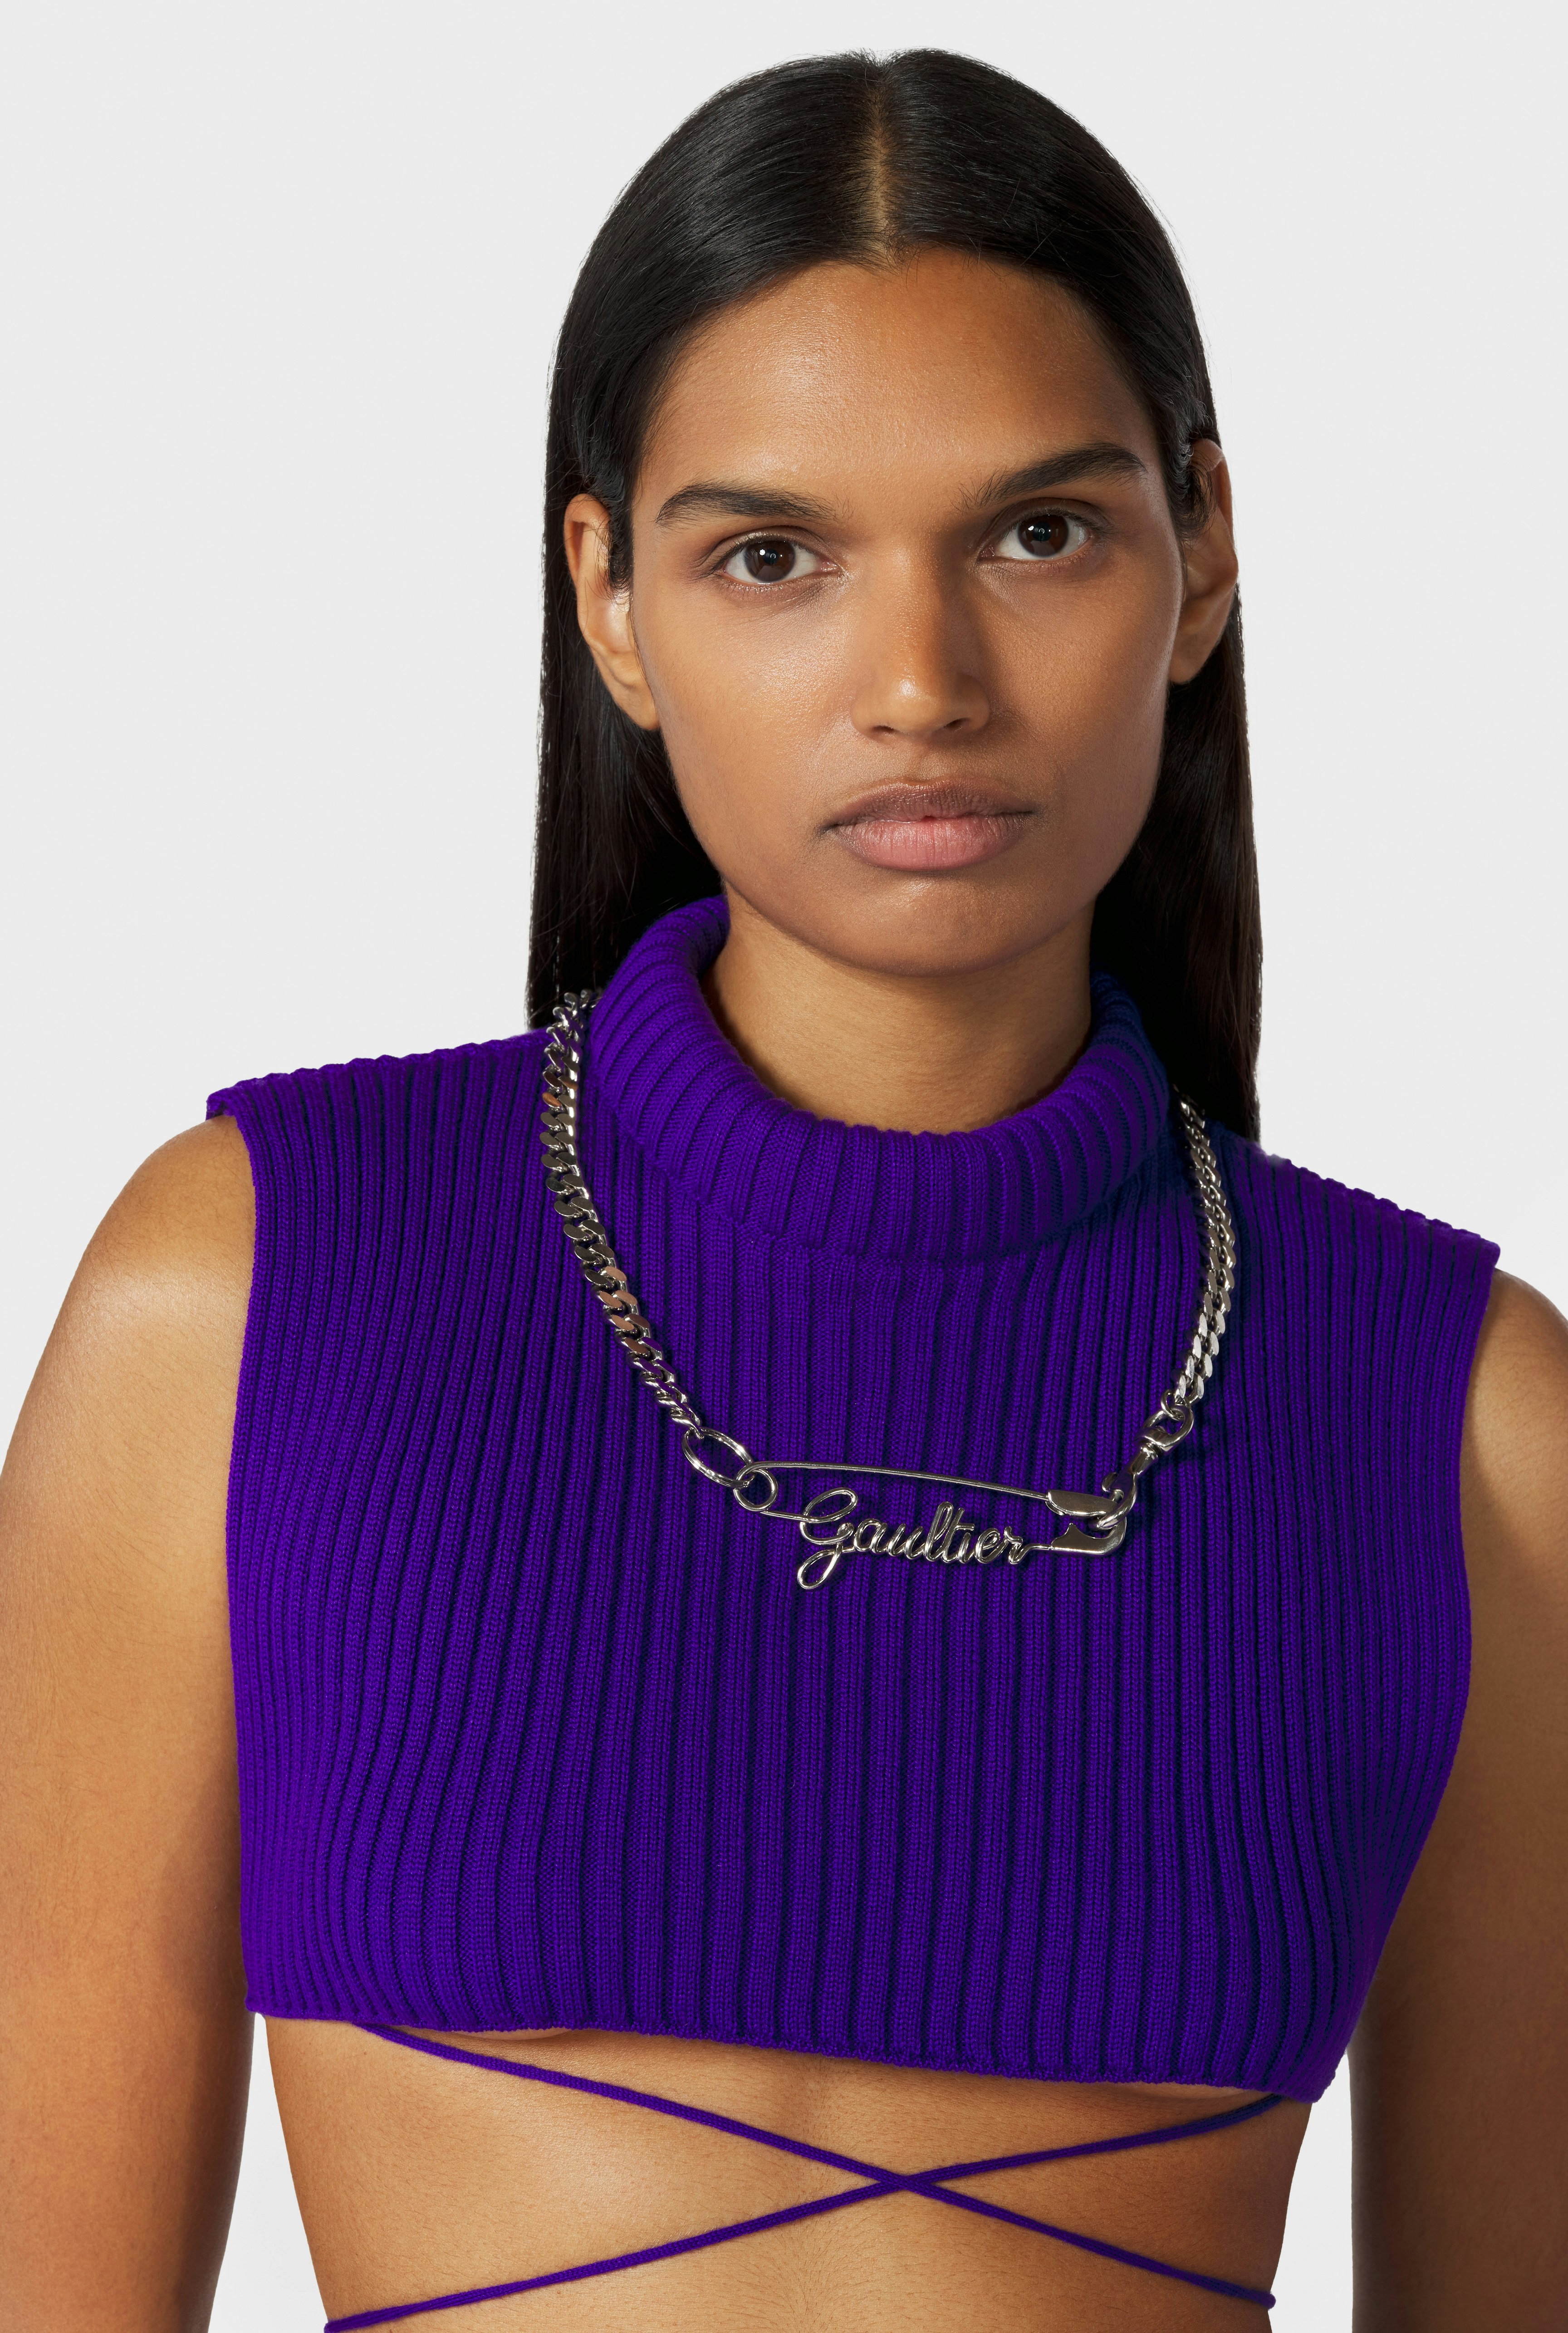 The Gaultier Safety Pin necklace